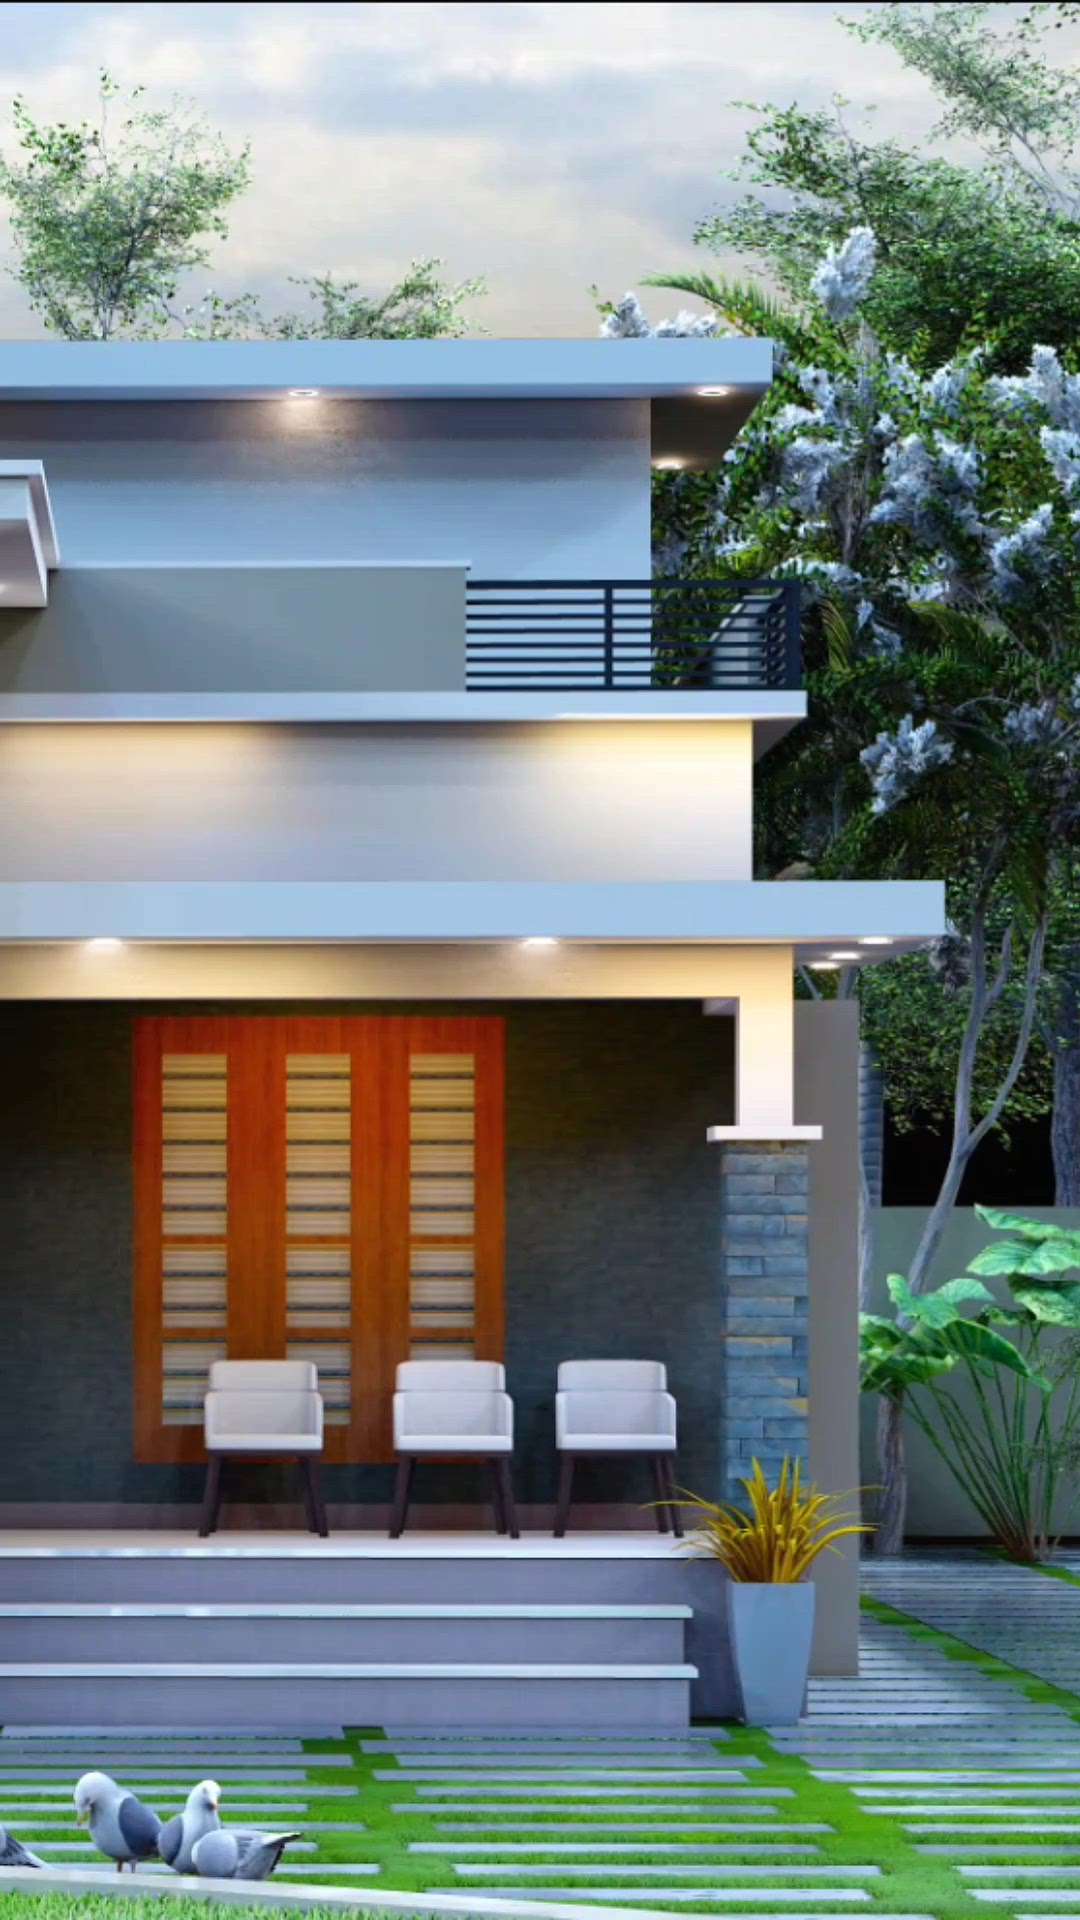 Exterior view ✨🏡
Budget Home..Area : 970sq
2 Bhk...

#house #kerala #reels #reelsinstagram #reelsvideo #reelitfeelit #architecture #civilengineering #homedecor #homedesign #home #archdaily #keralagodsowncountry #beautiful #houseplants #homemade